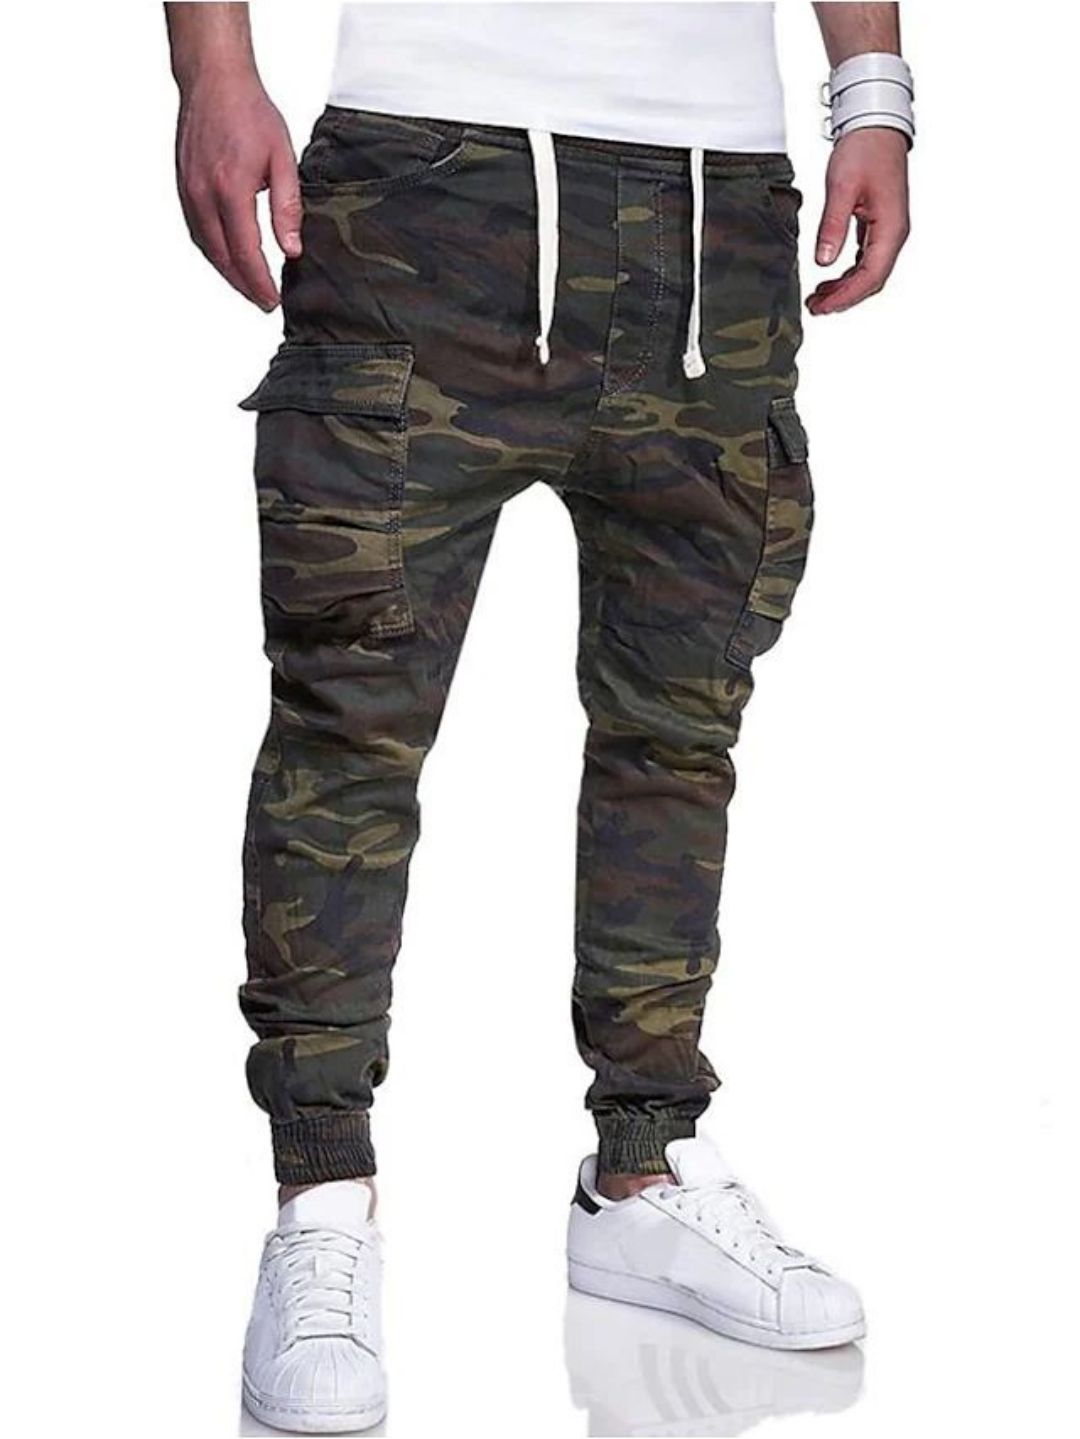 Men's Cargo camouflage Jogger Pants Tactical